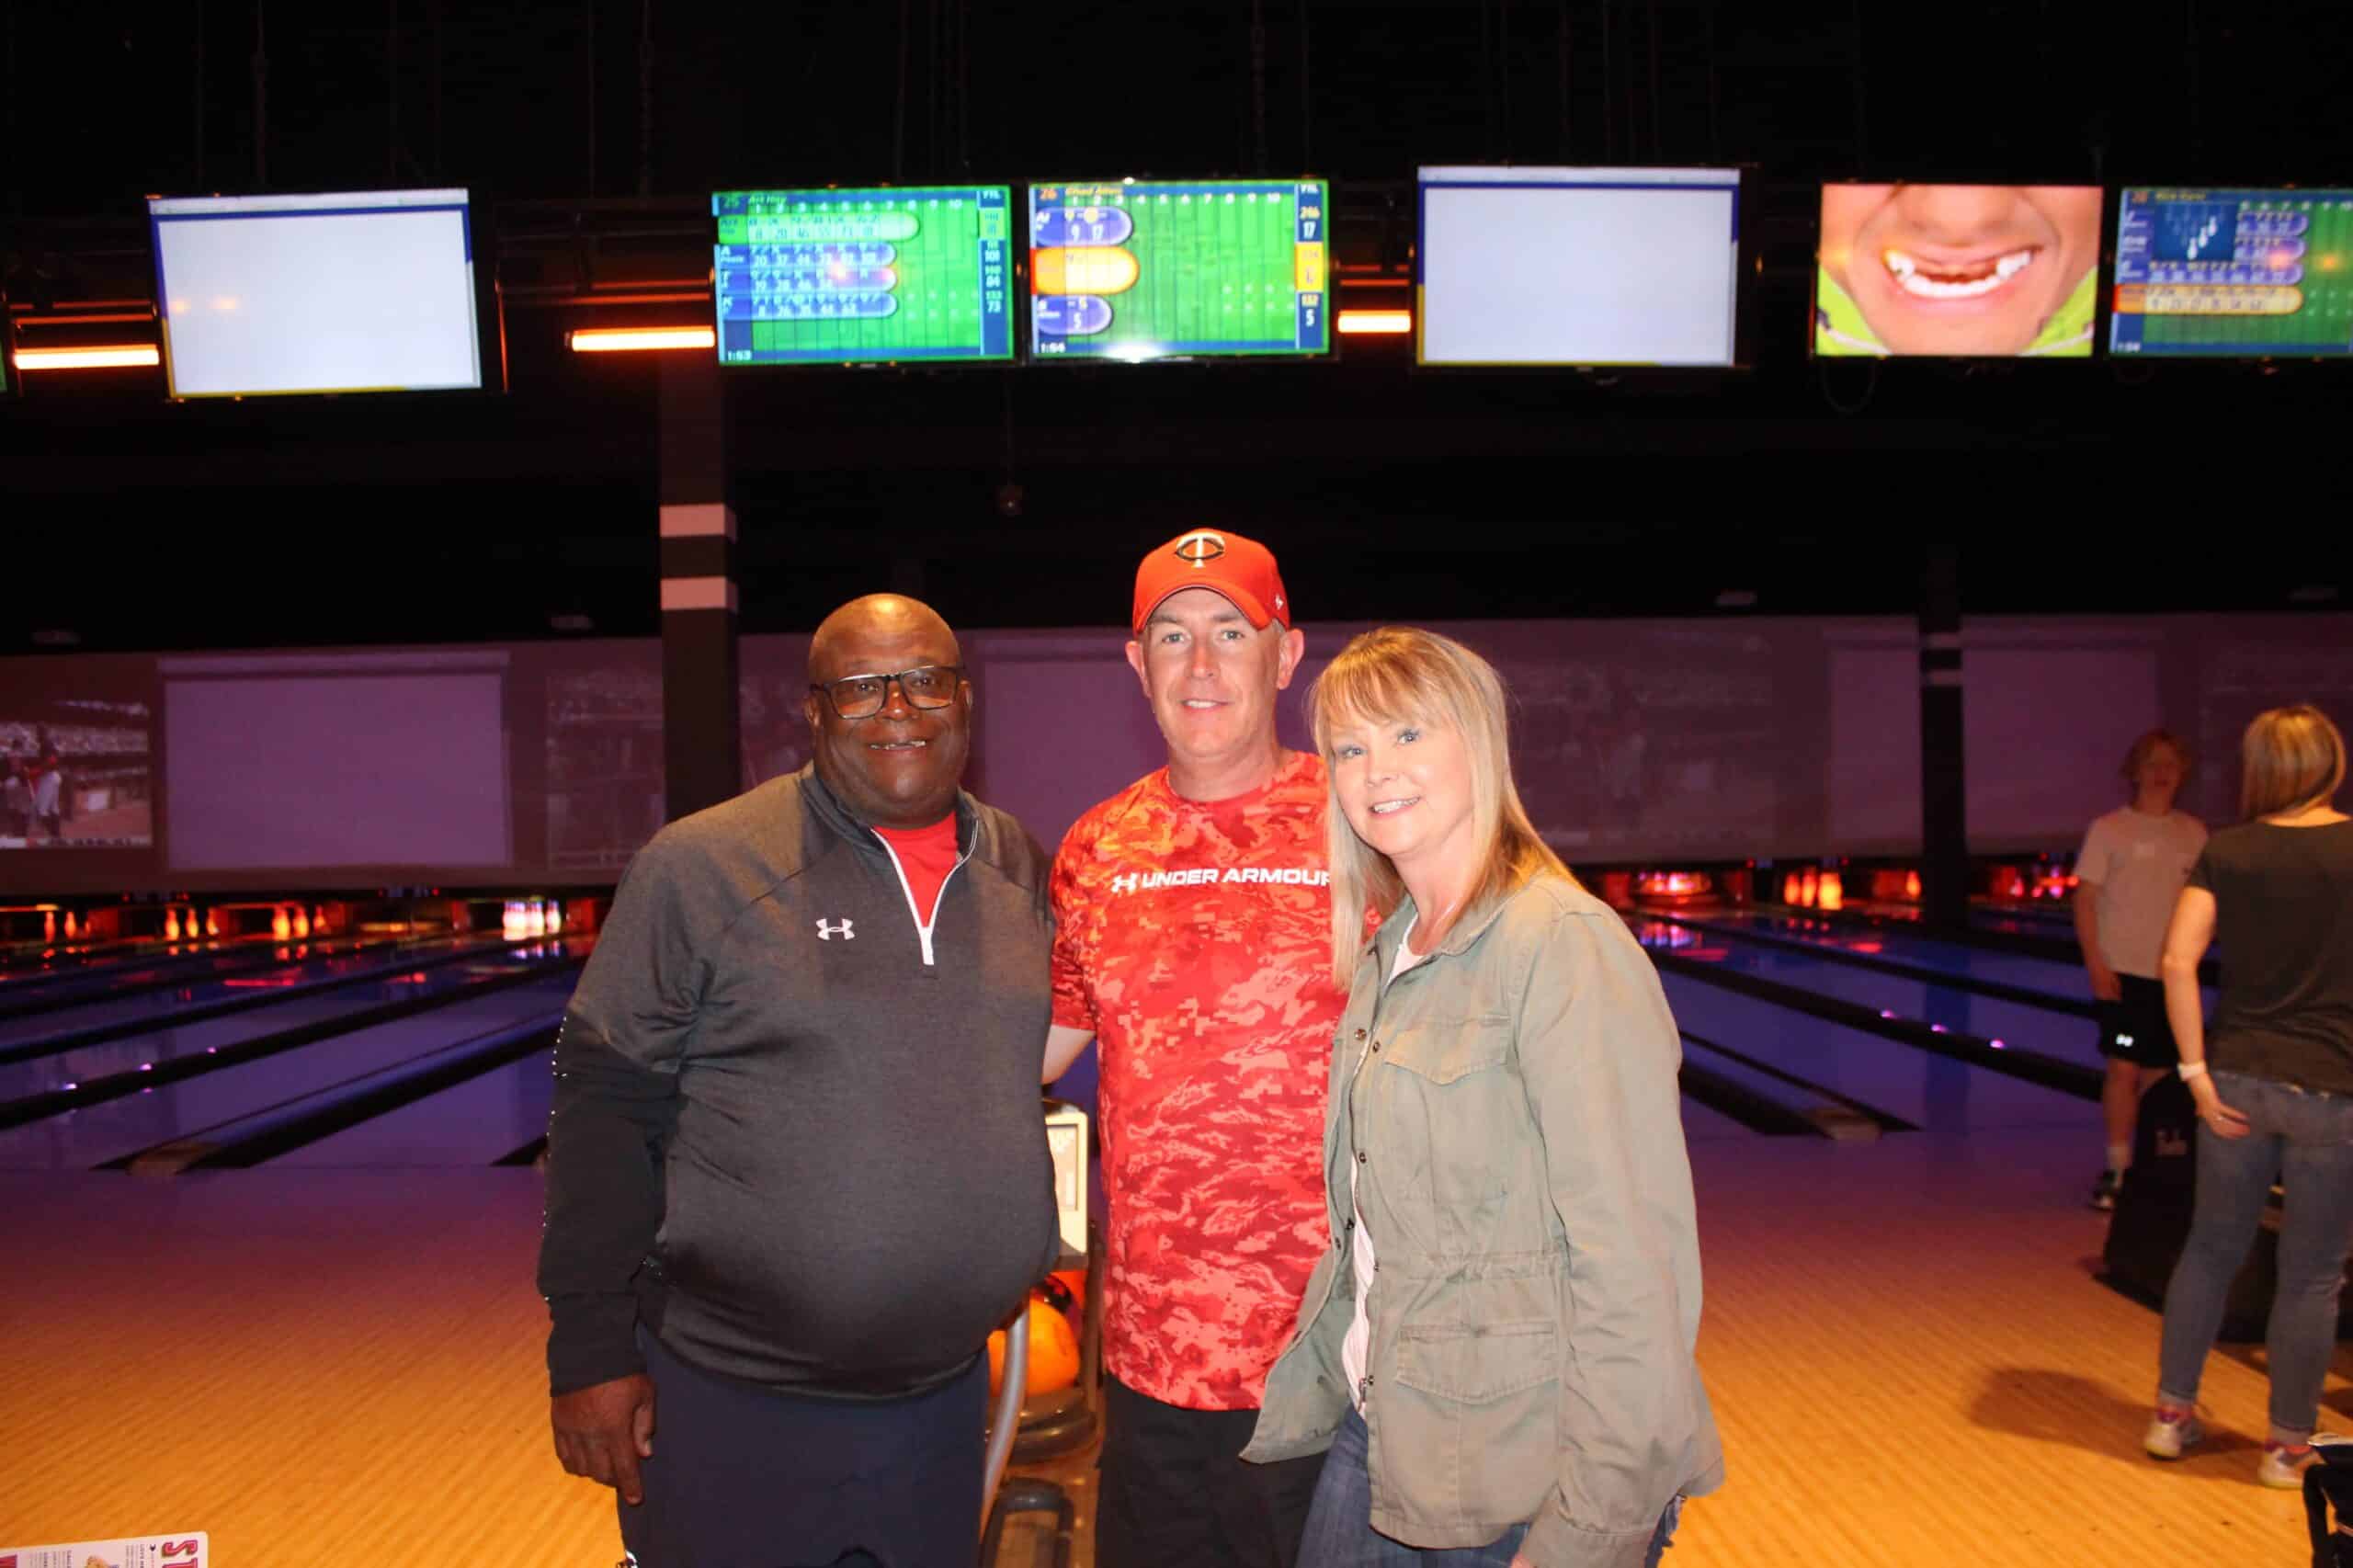 Three people at a bowling alley